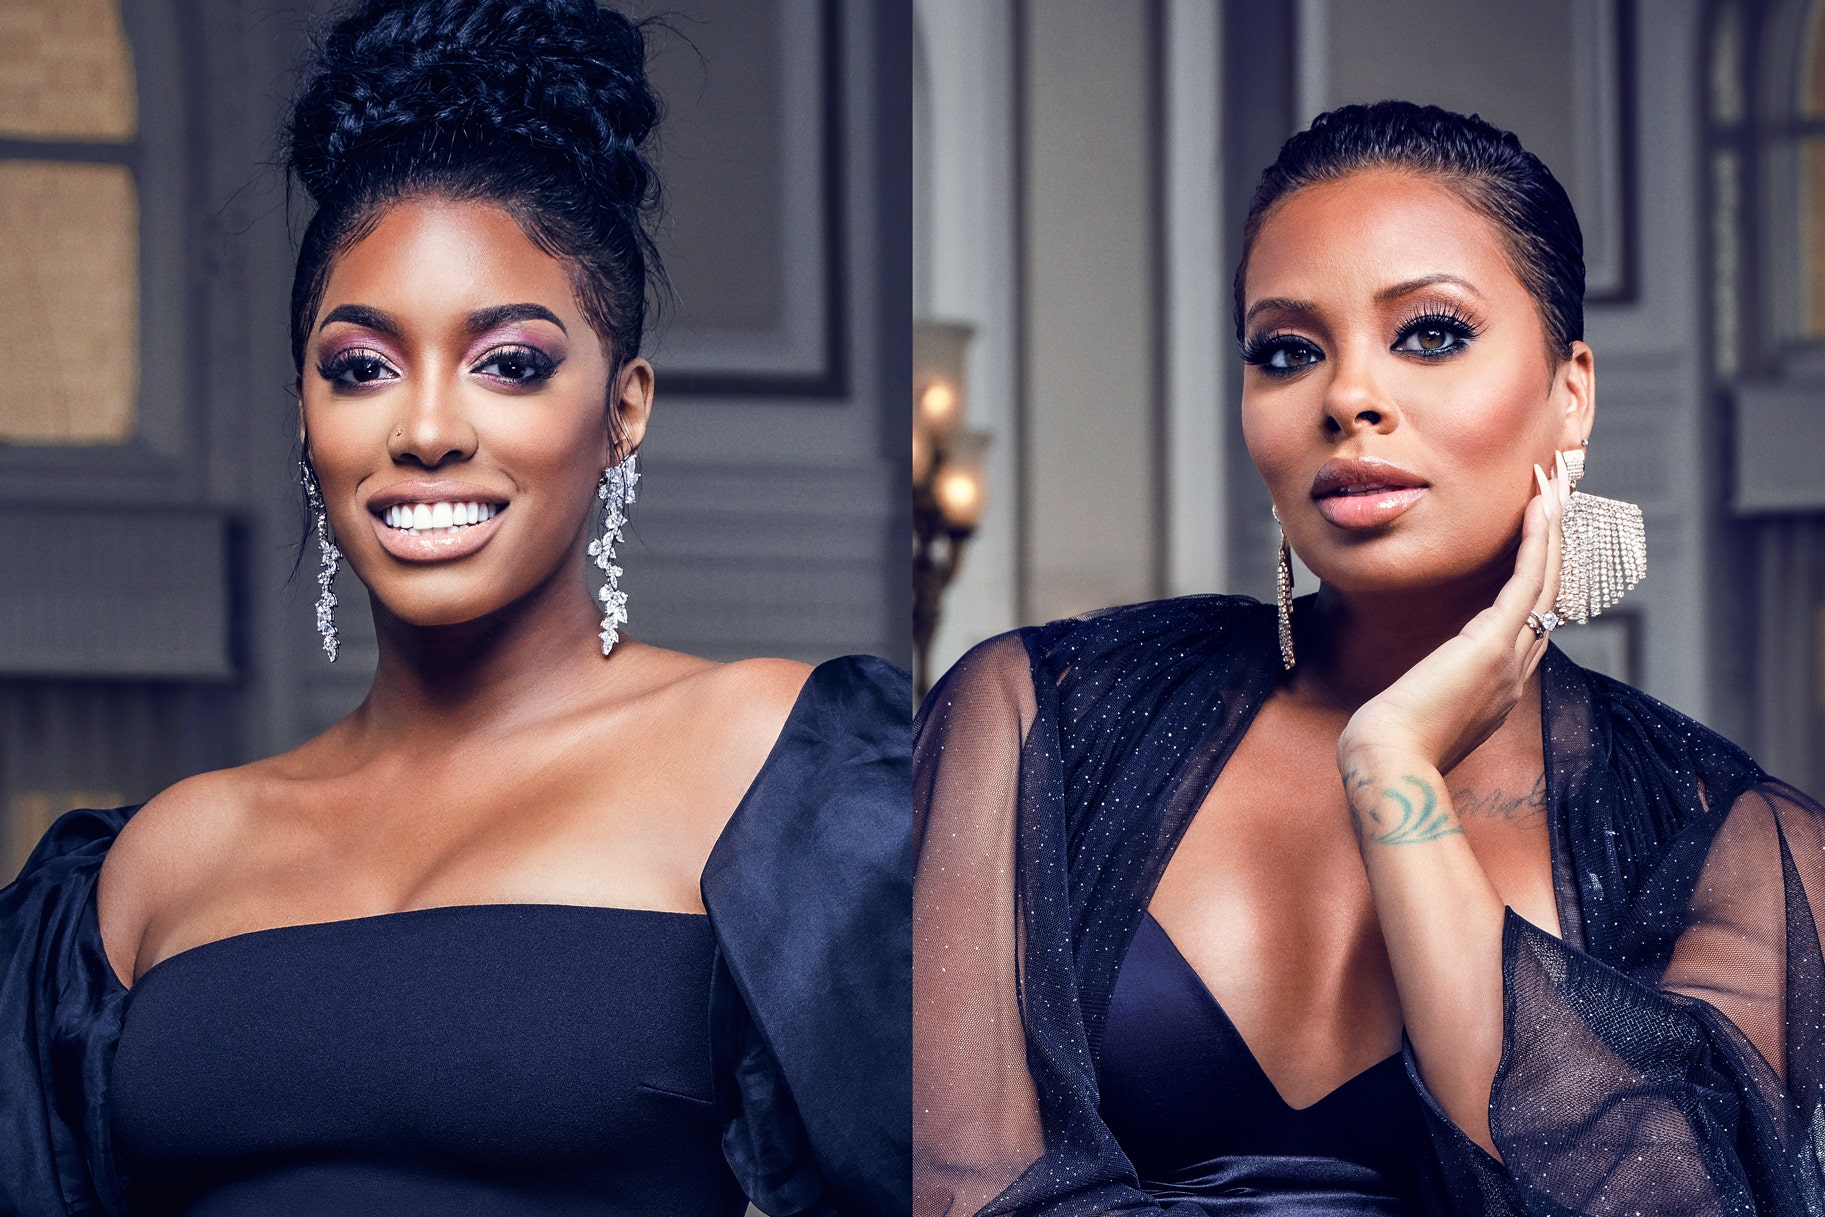 Why Are Porsha Williams And Eva Marcille Feuding Over A Birthday Party? 